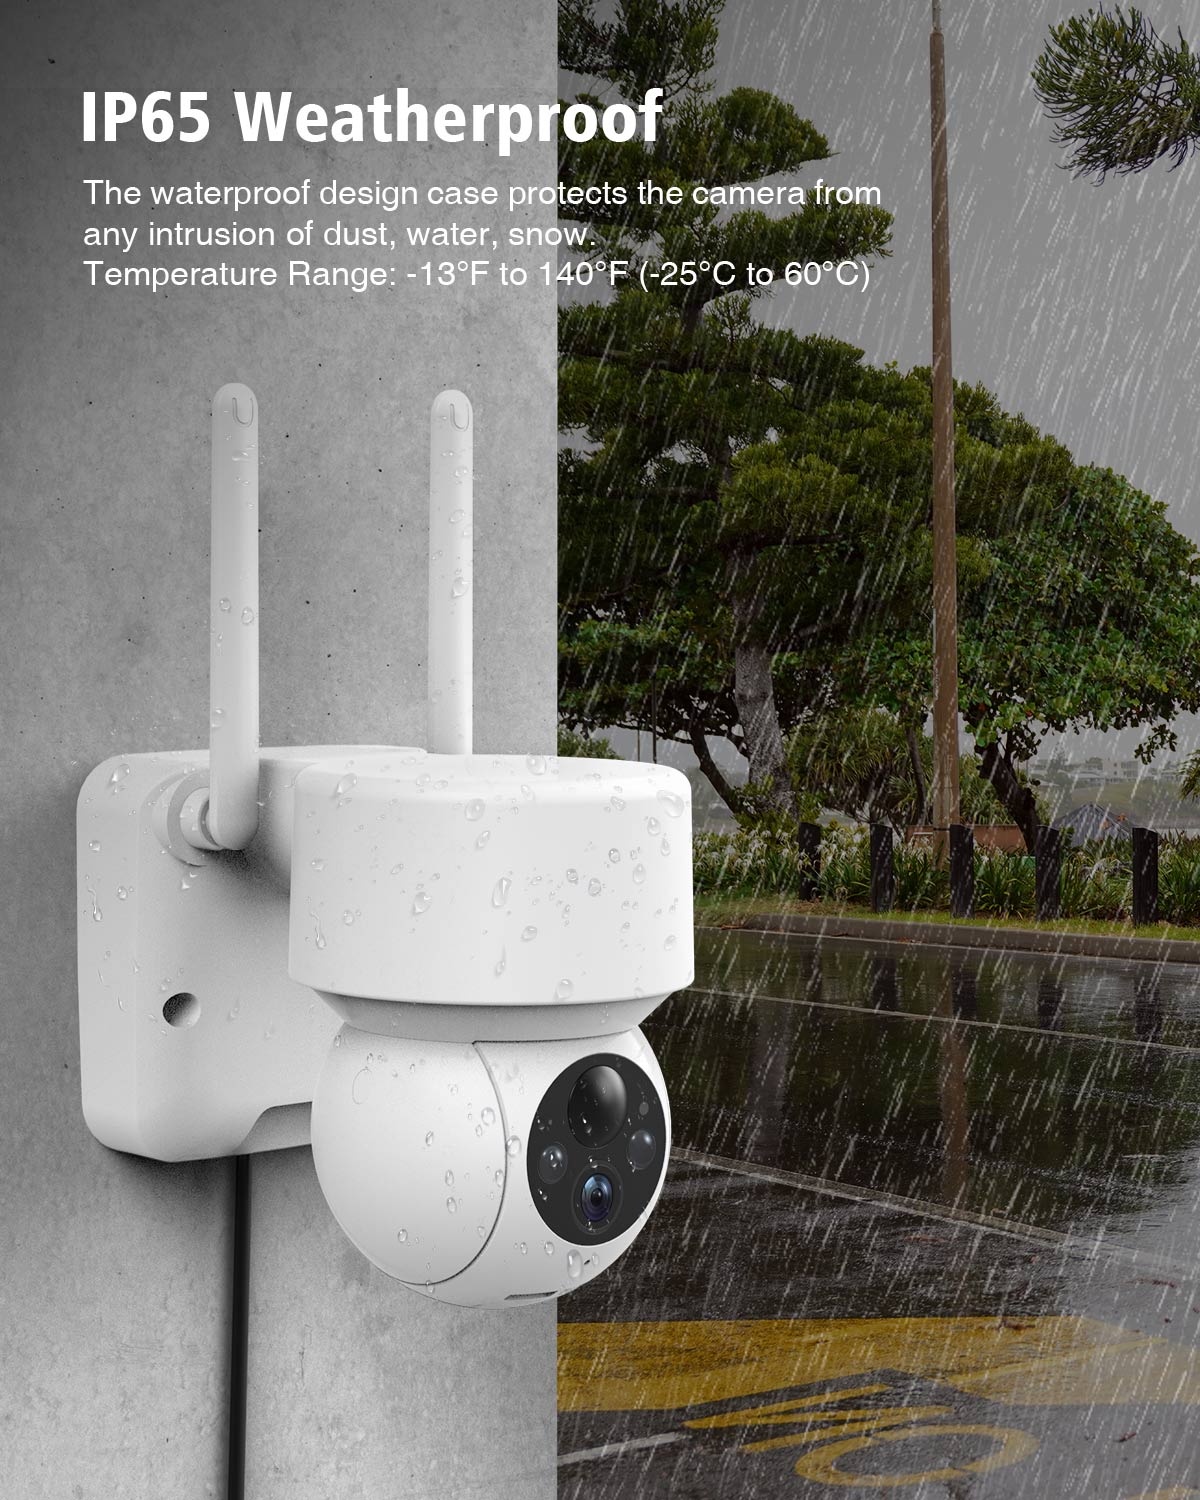 Campark SC500 1080P Color Night Vision Security Camera With Motion Detection (Only Available In Europe,The UK)